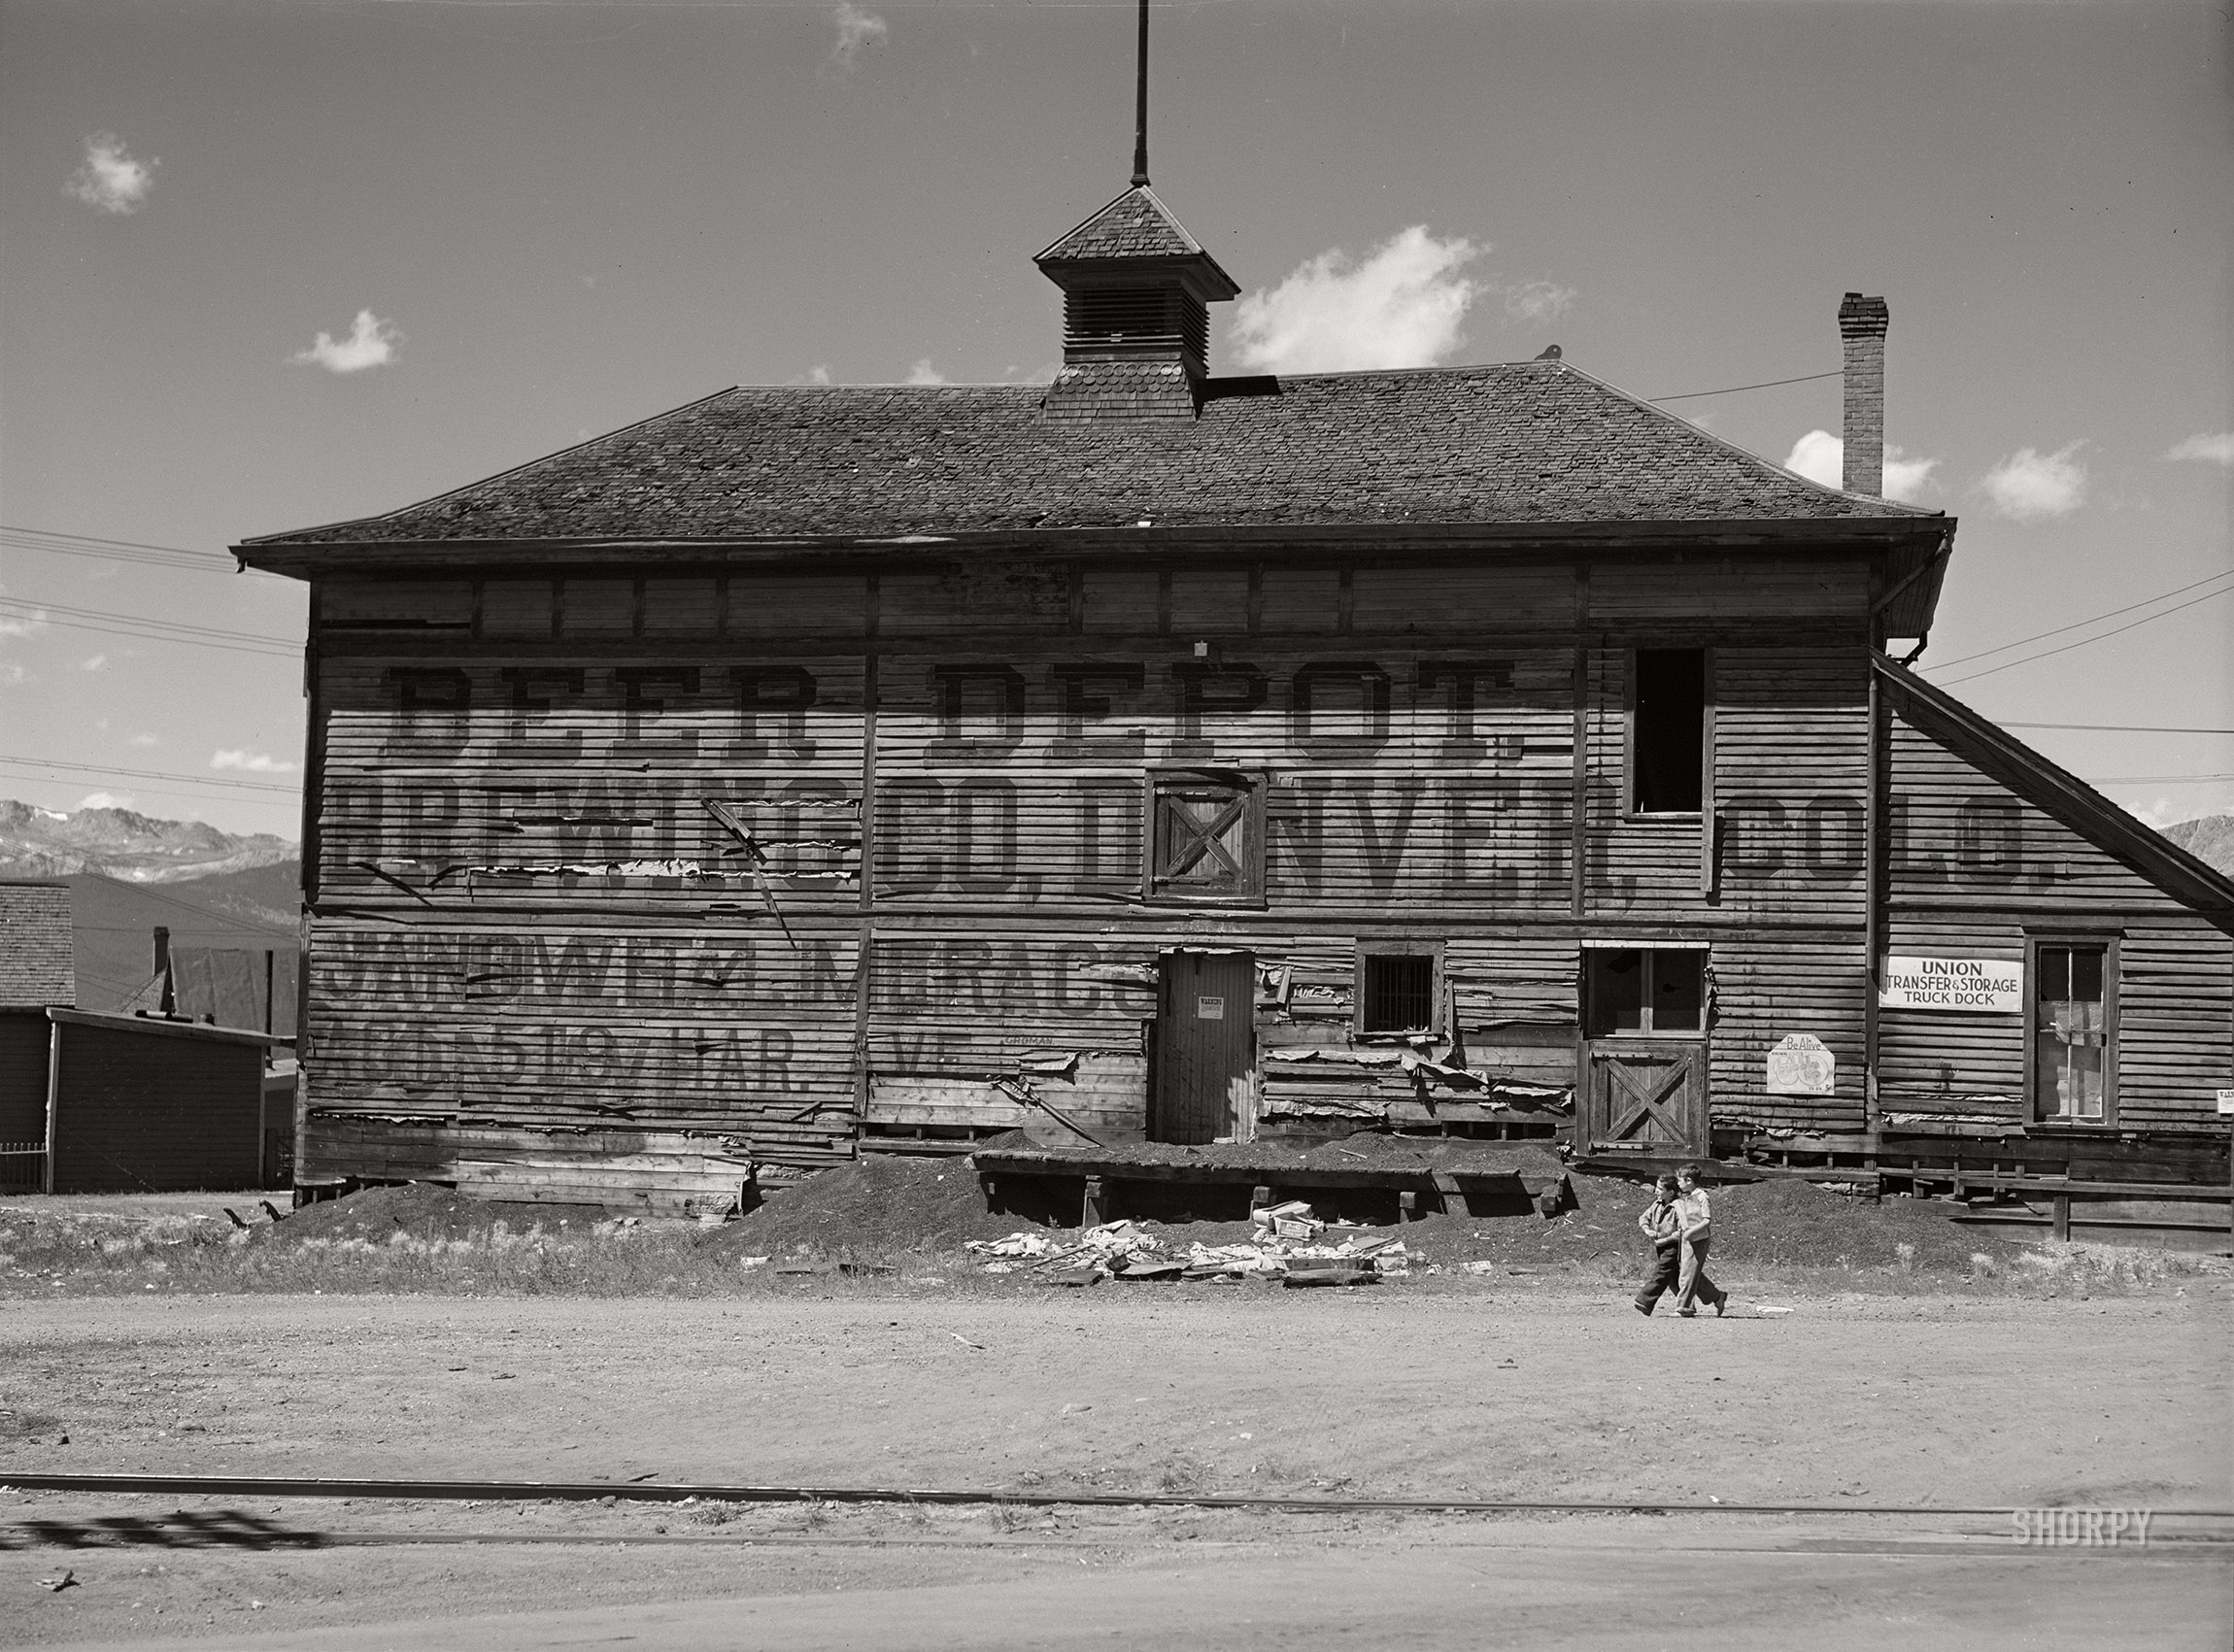 September 1941. "Old beer depot in mining town. Leadville, Colorado." Medium format acetate negative by Marion Post Wolcott for the Farm Security Administration. View full size.